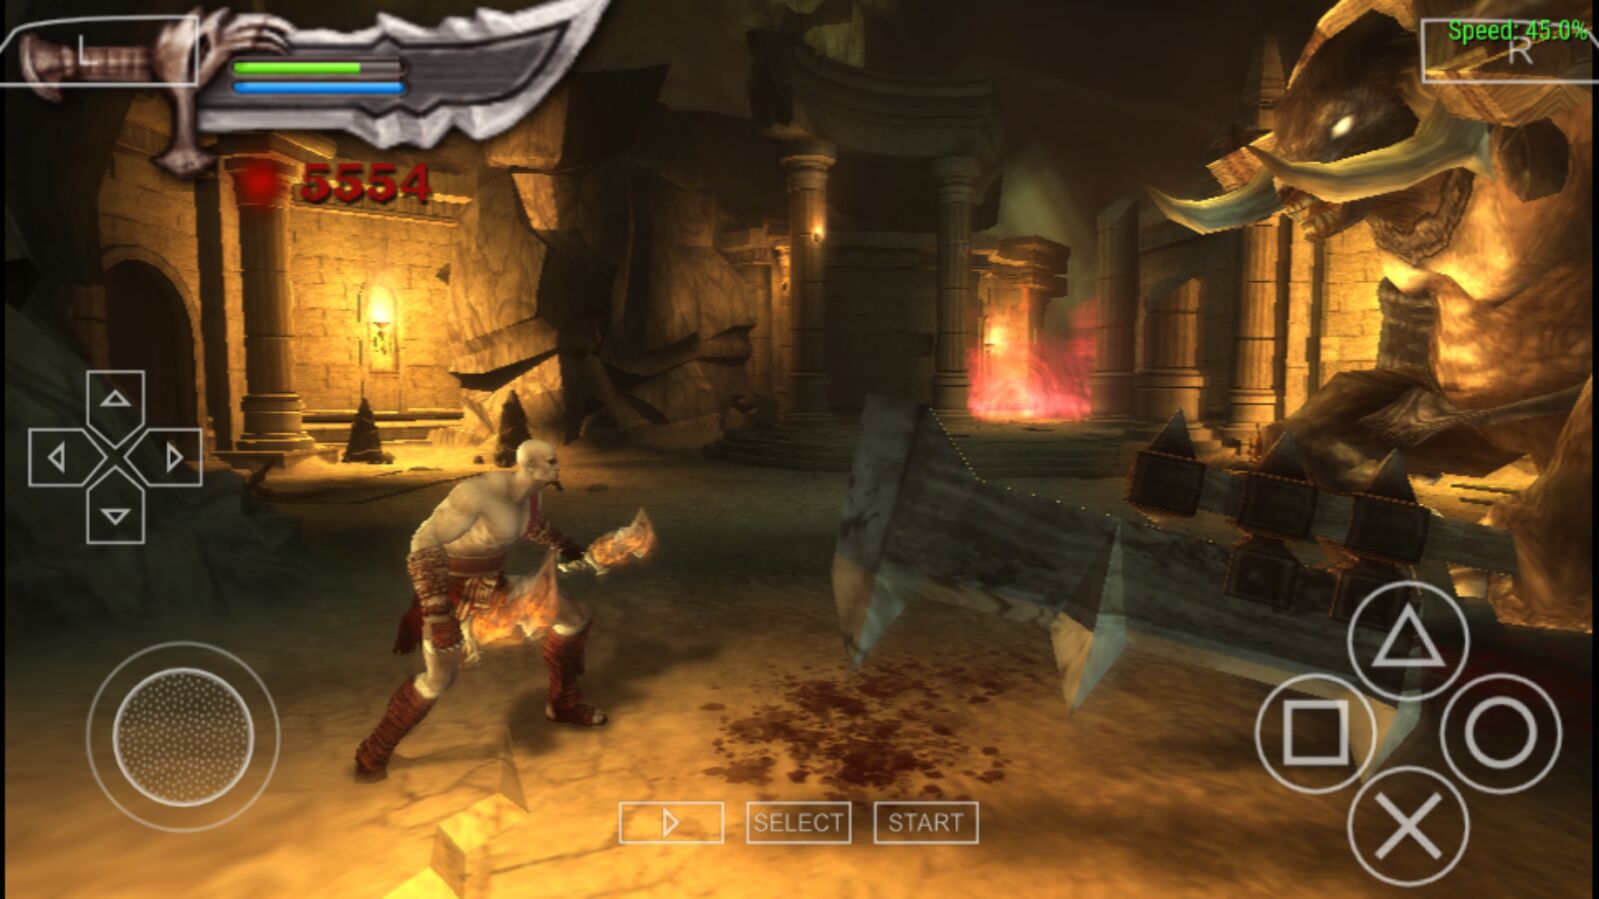 god of war 3 iso download for ppsspp